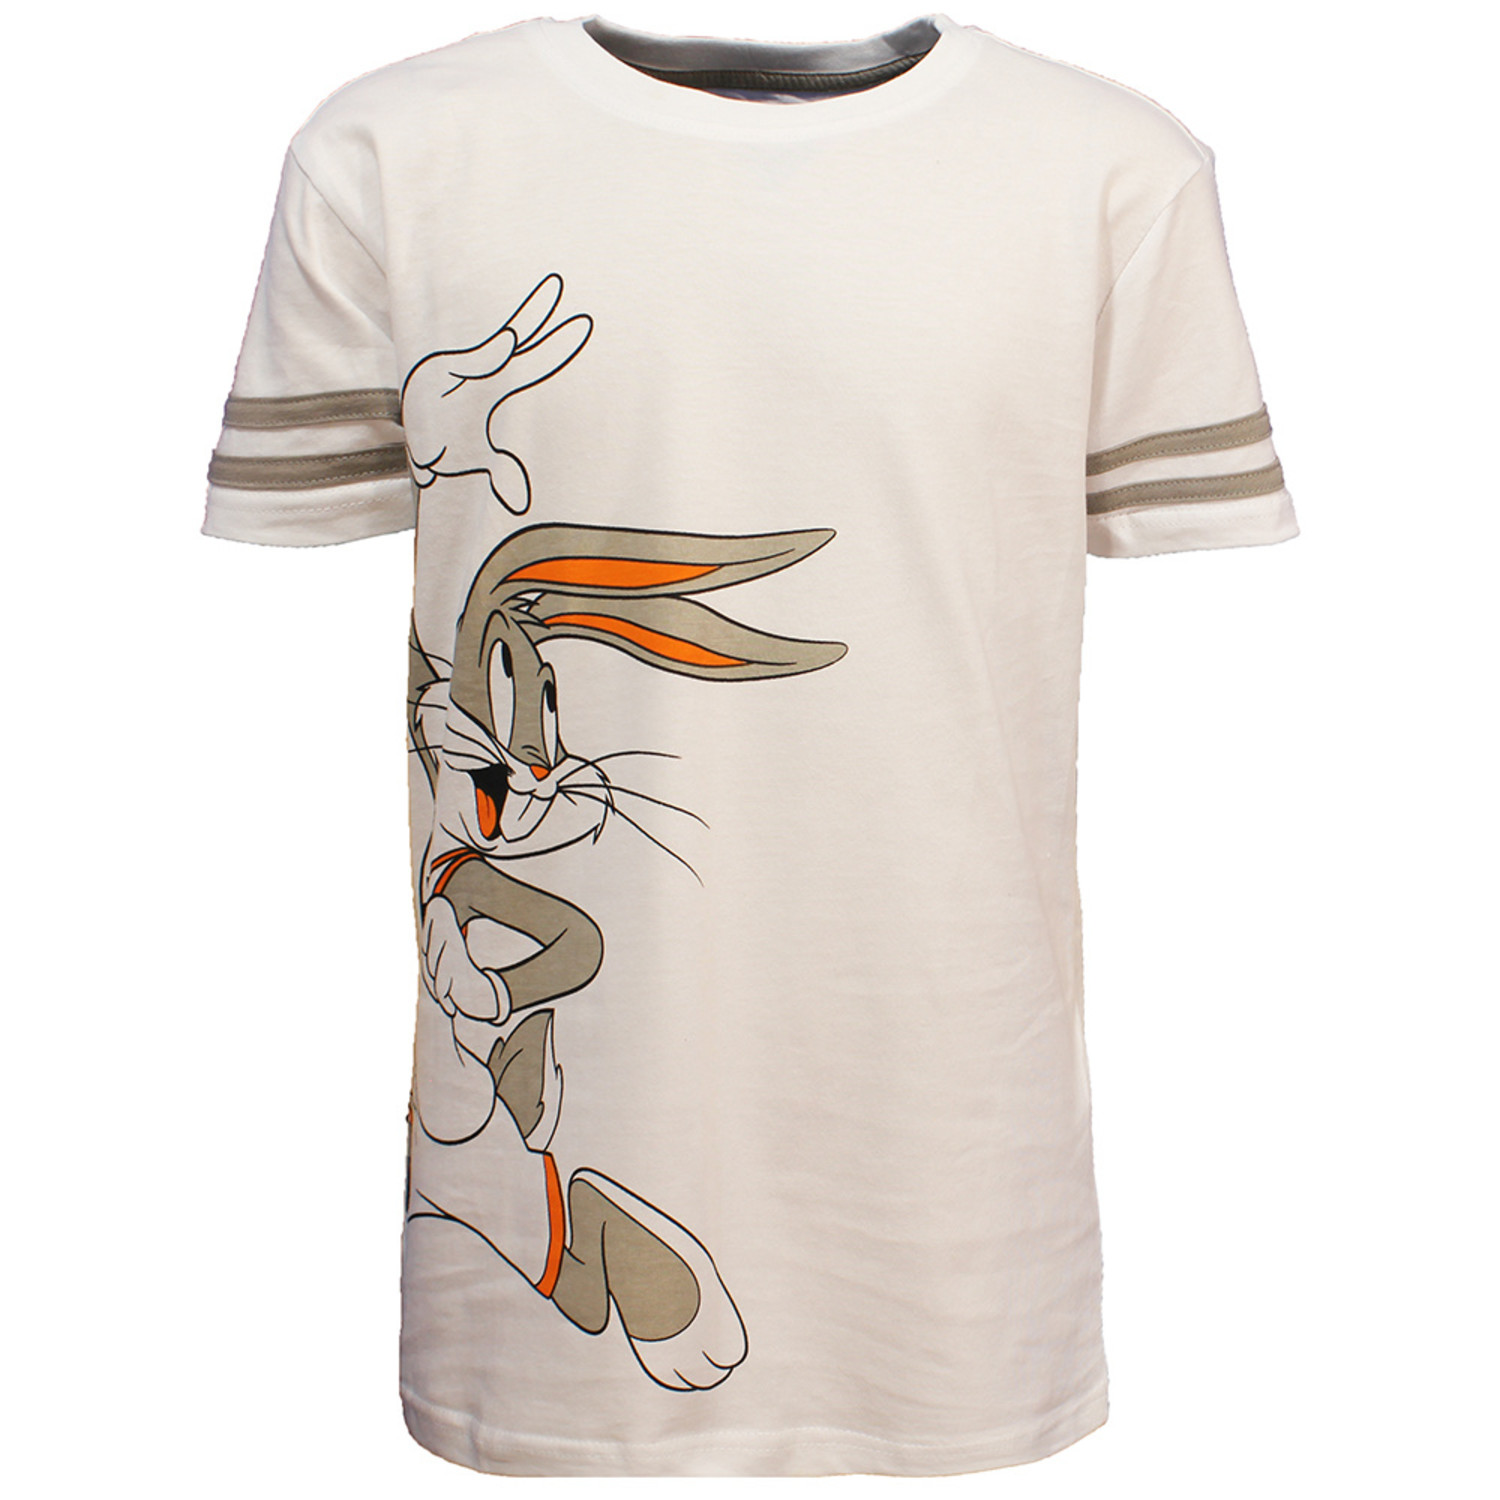 Looney Tunes T-Shirt Bug Bunny Kids Licensed Officially Jam Space - White